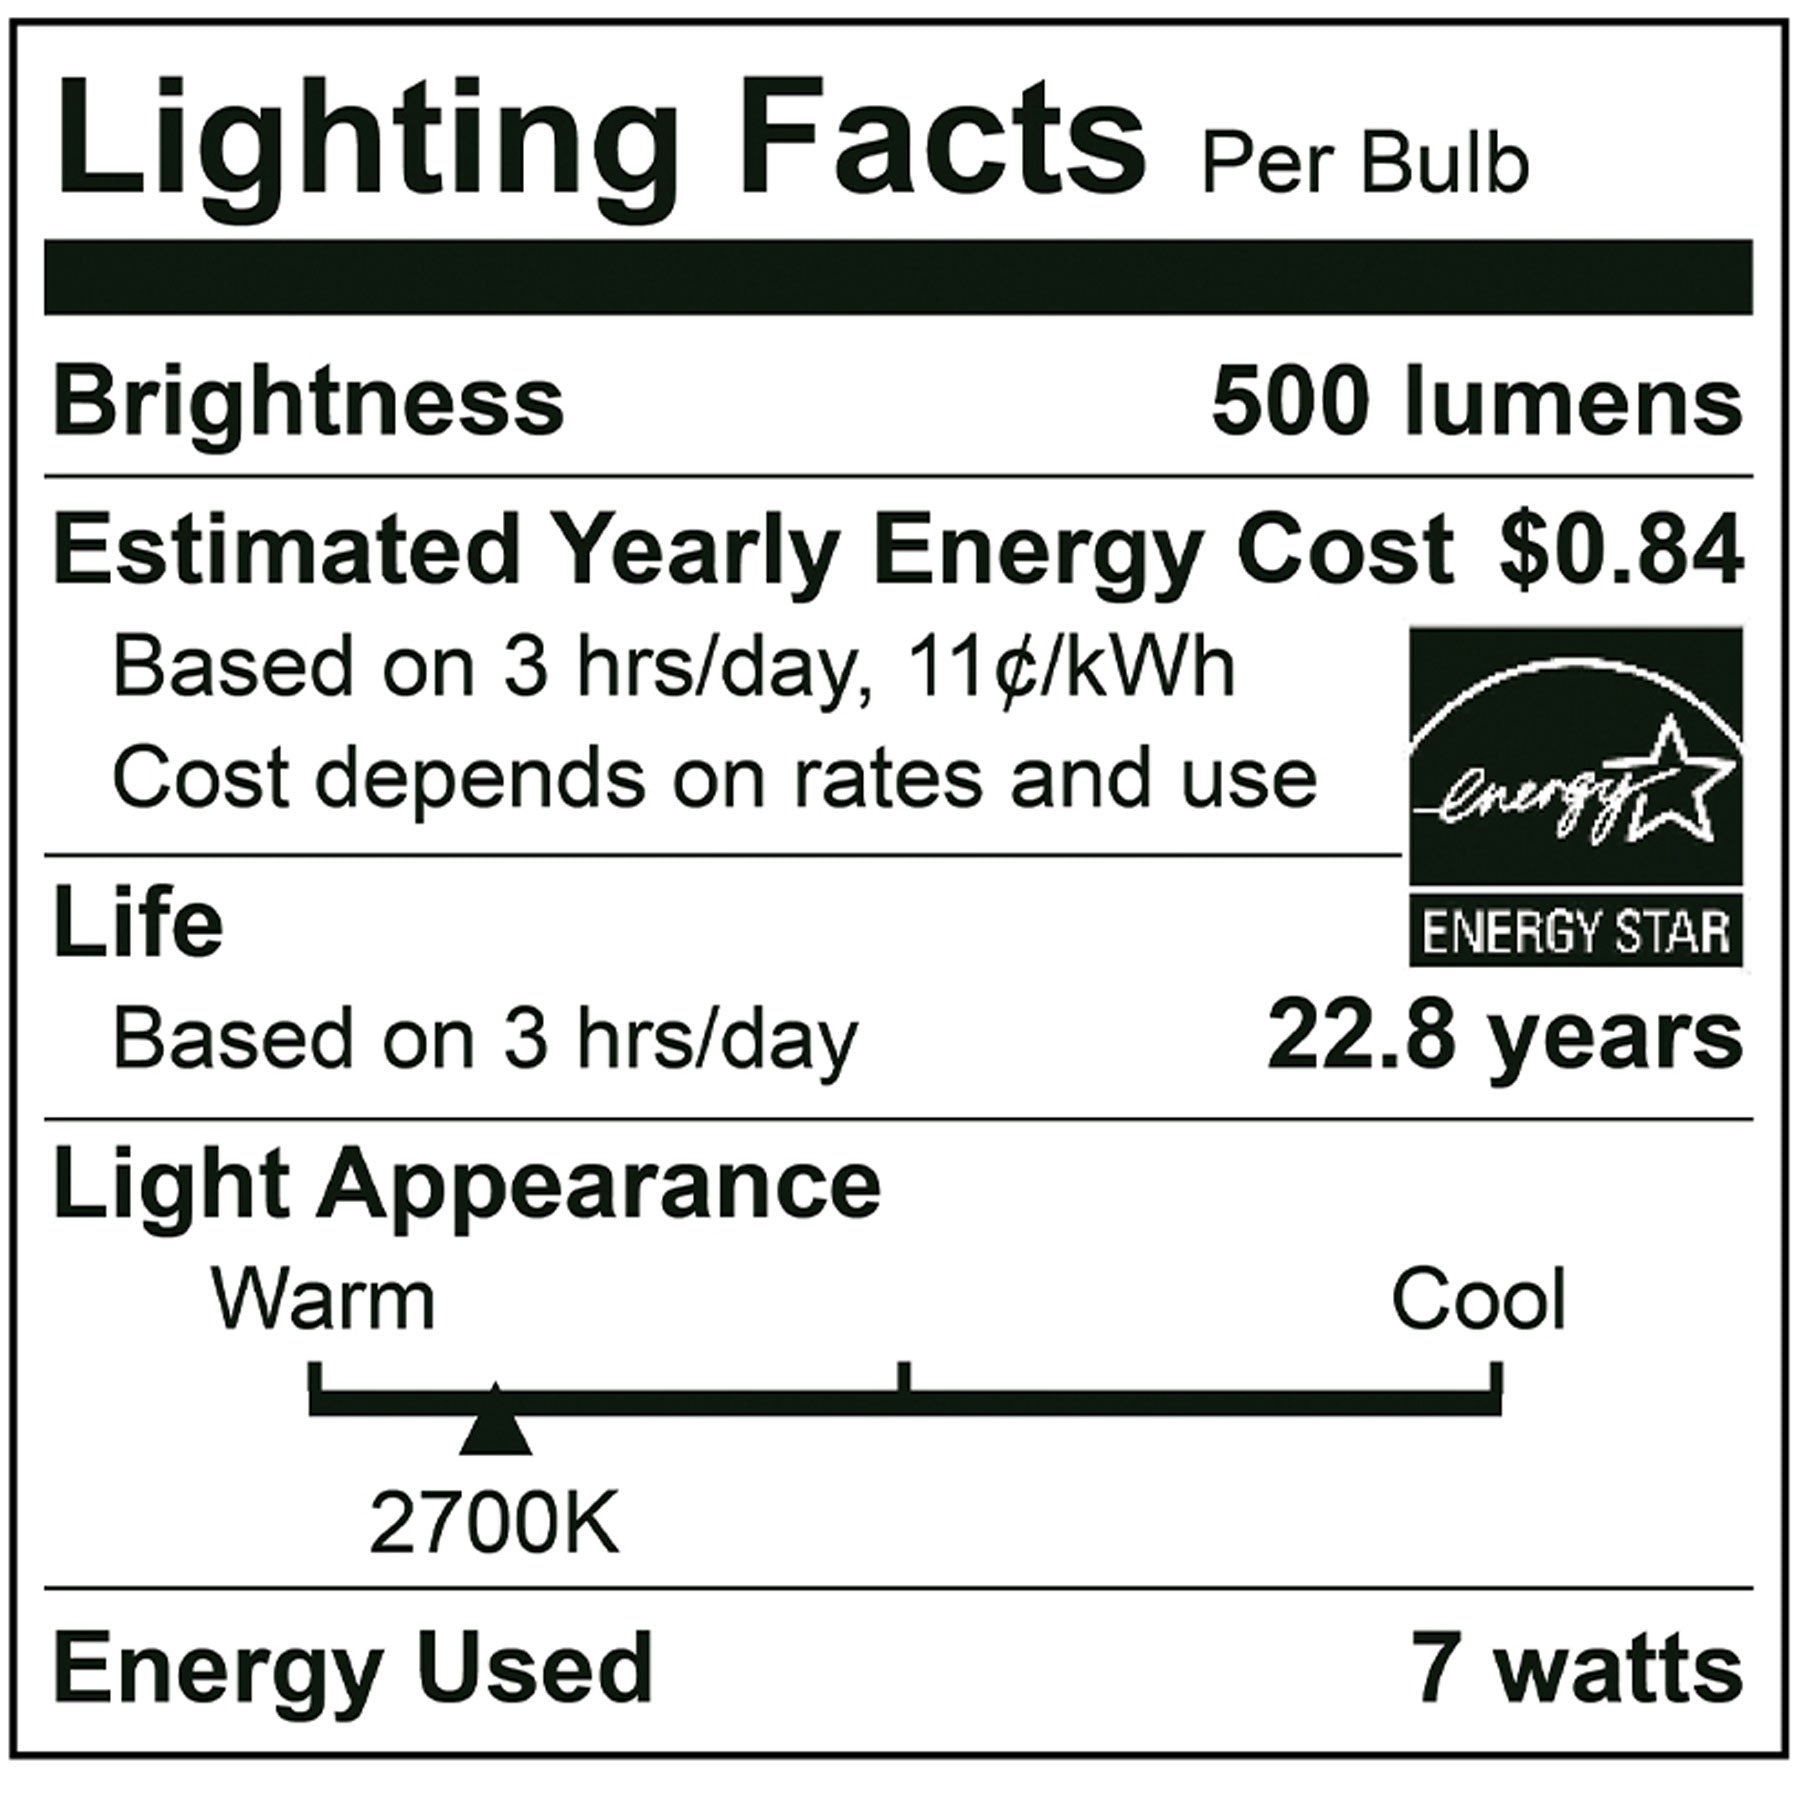 Ecoled Aruba - How bright are you when it comes to lighting